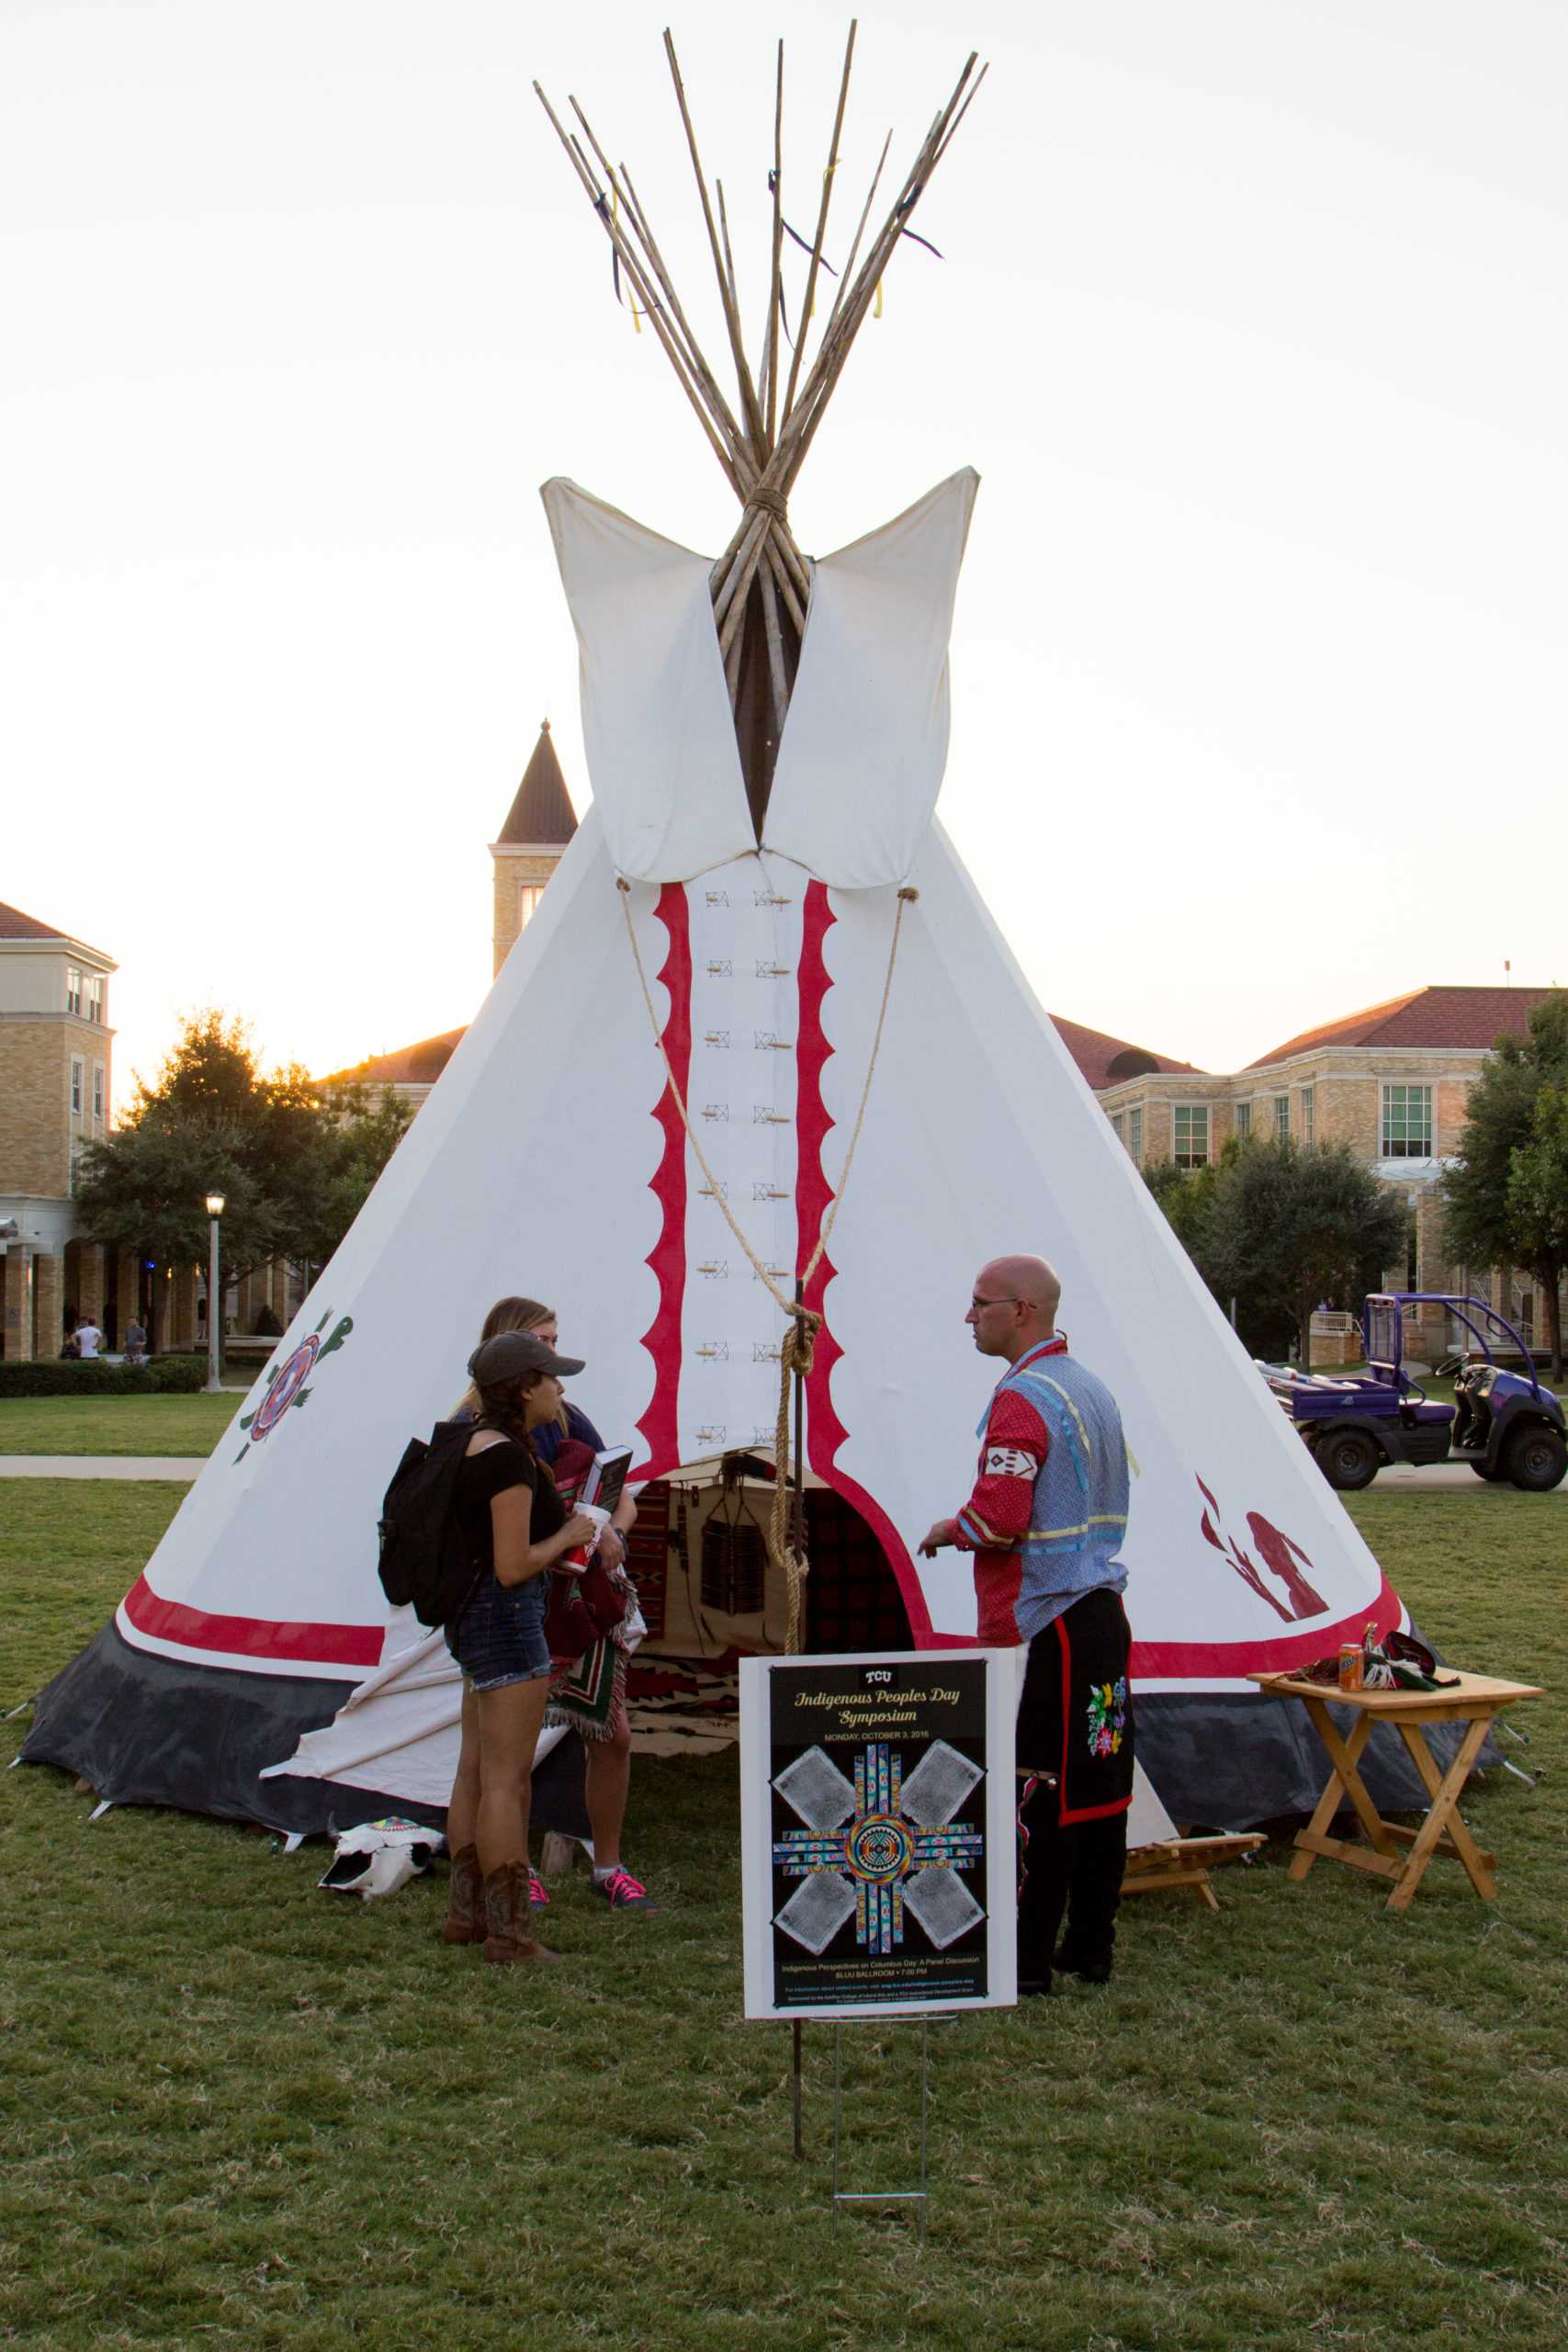 Carl Kurtz tells students about his tipi that he set up in the Commons for the Indigenous People's Day Symposium. (Sam Bruton/TCU Staff Photographer)